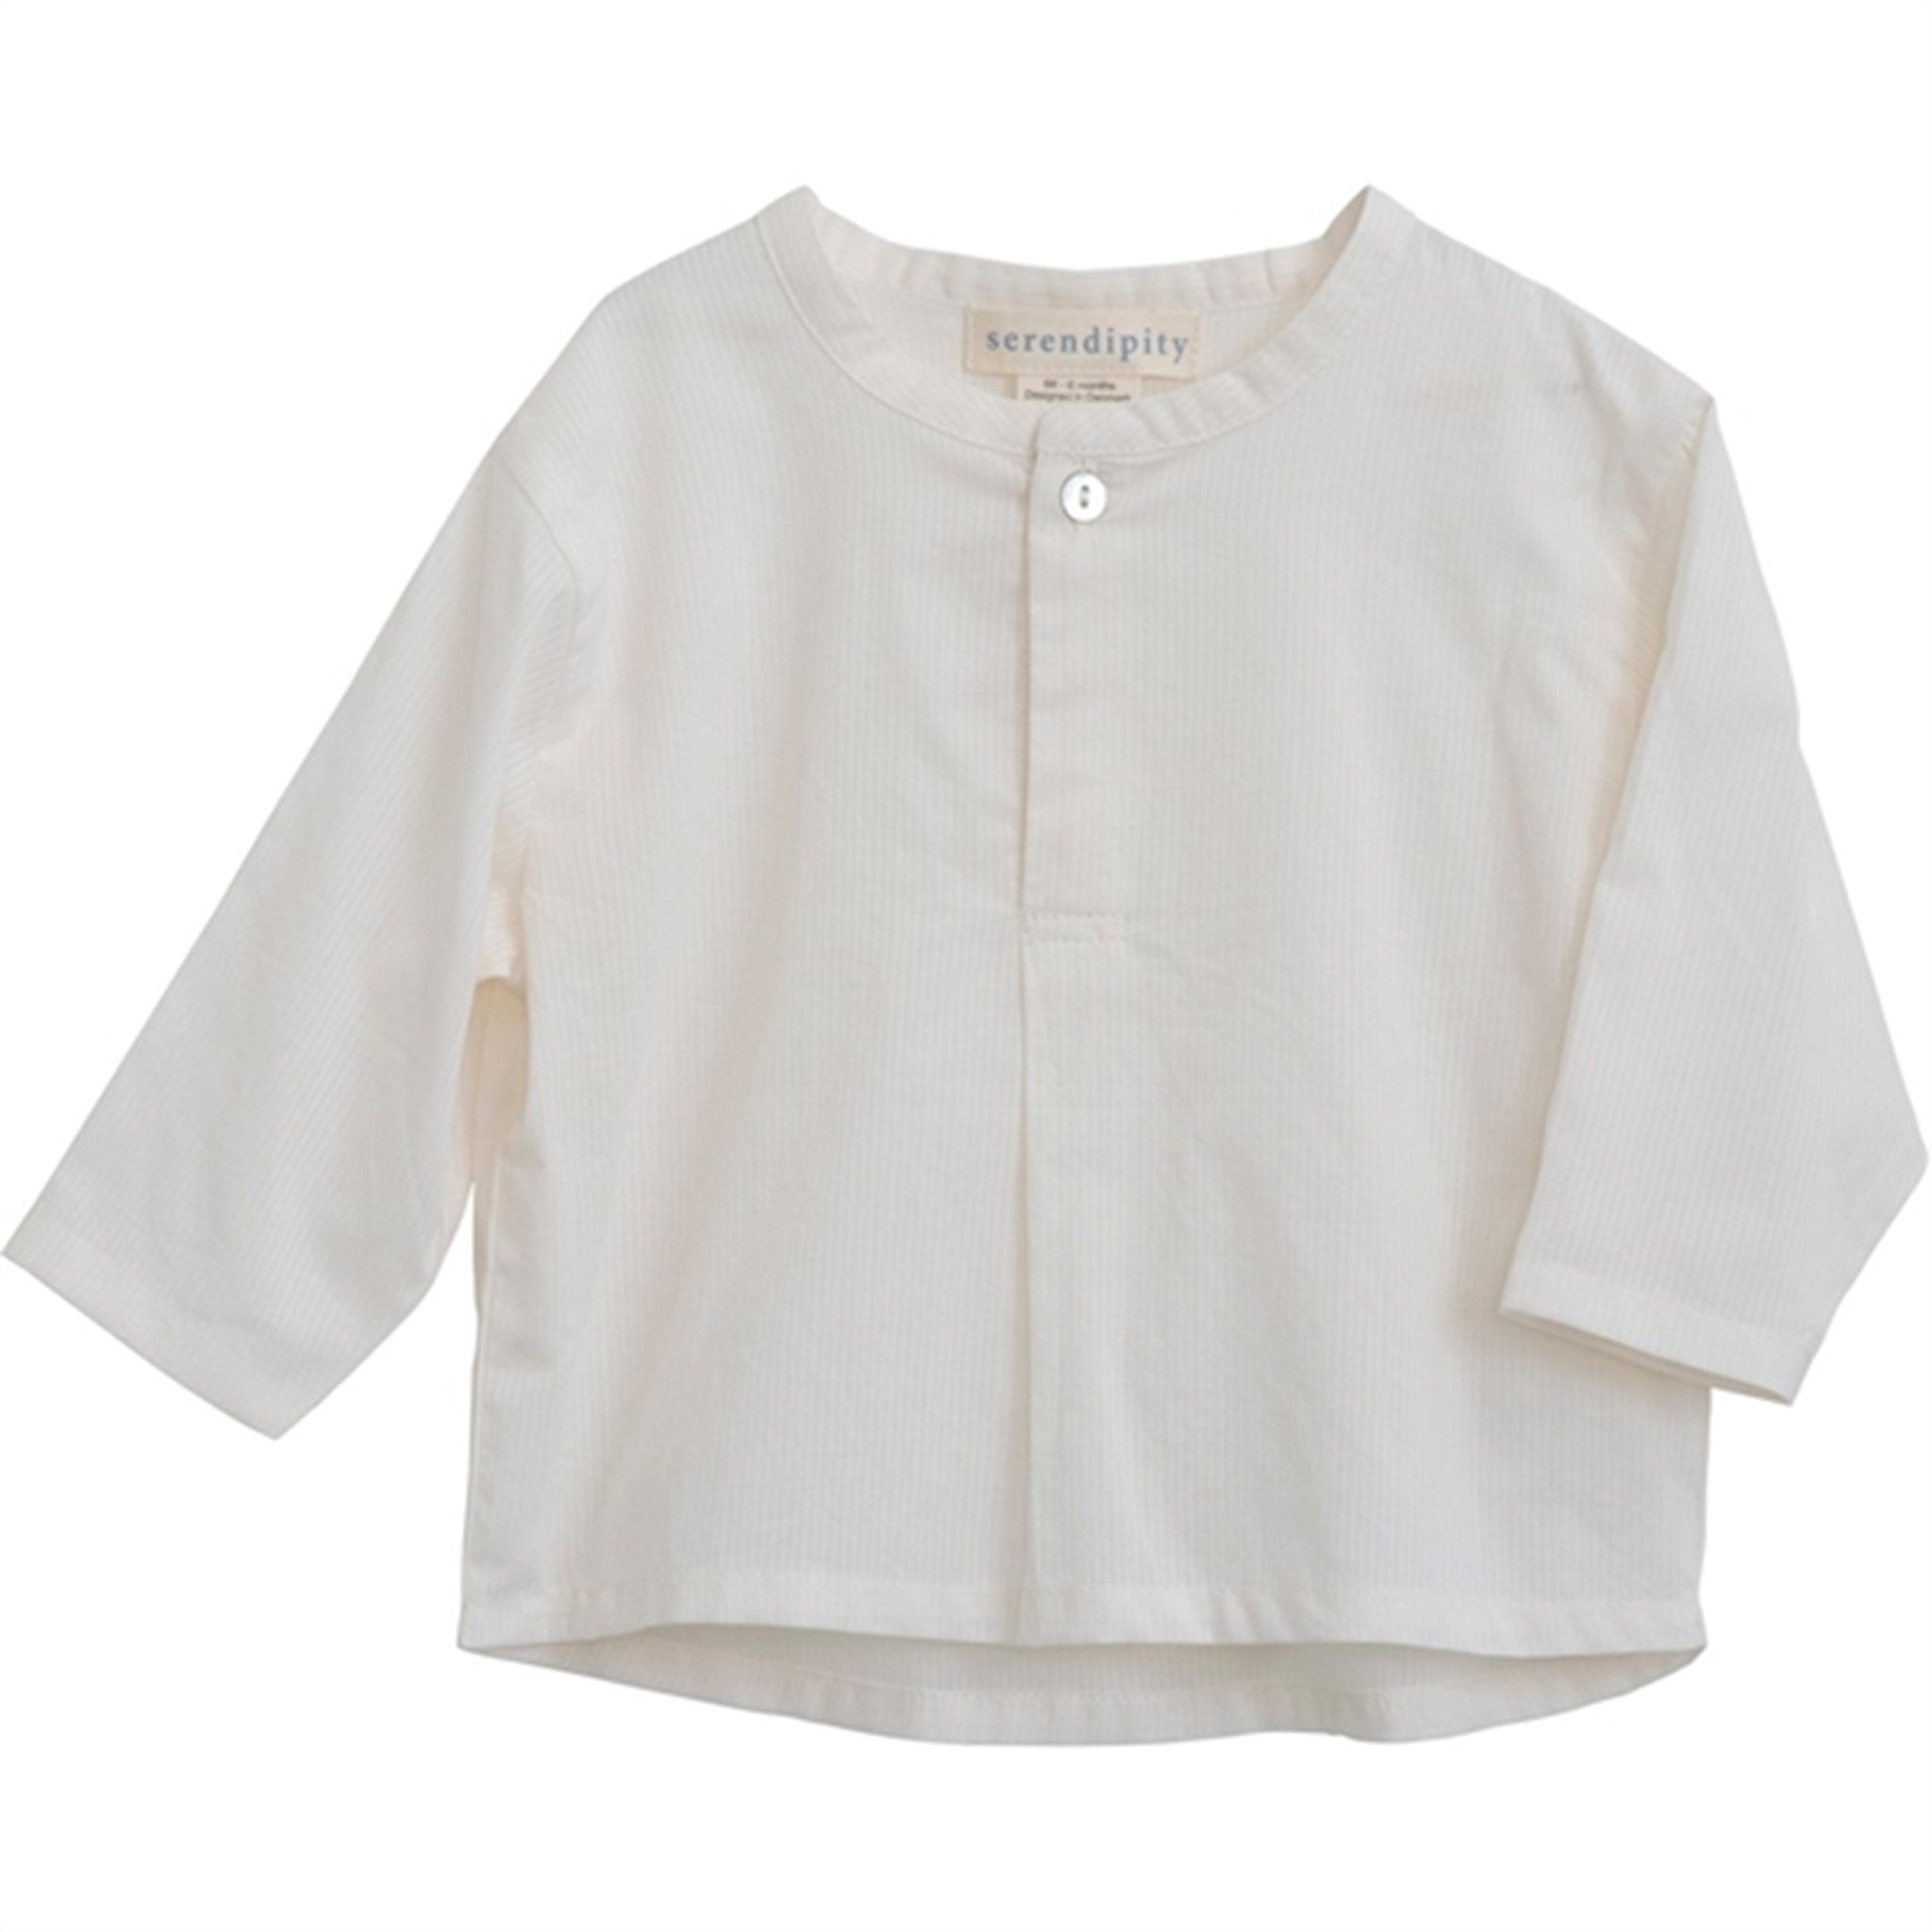 Serendipity Offwhite Baby Loose Shirt